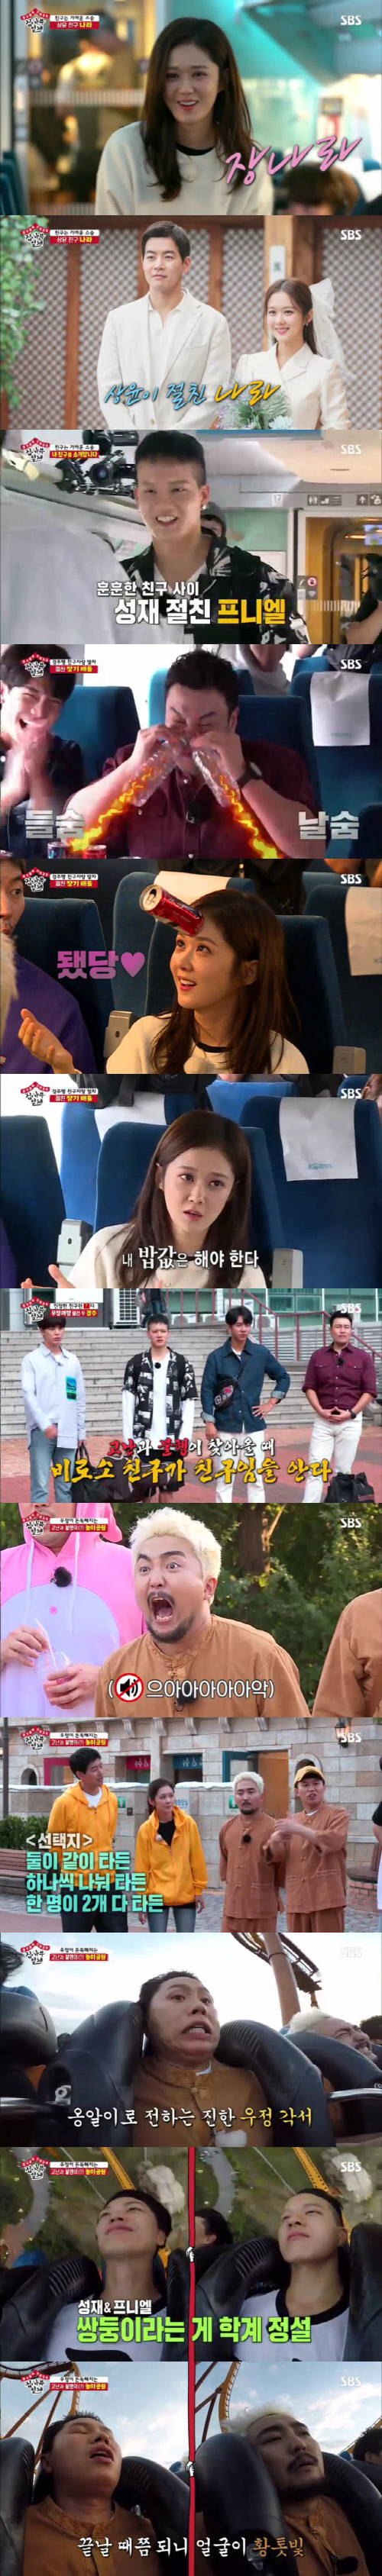 According to Nielsen Korea, SBS All The Butlers furniture TV viewer ratings, which was broadcast on the 22nd, recorded 7.3% (subject 2 in the Seoul metropolitan area) and 2049 target TV viewer ratings, which were collected for young viewers aged 20 to 49, recorded a whopping 3.7%.Top TV viewer ratings per minute soared to 8.4 percent, attracting attention.The broadcast was featured on the Friend Master special, and a moisturizing trip to Gyeongju was drawn with friends invited by Lee Seung-gi, Lee Sang-yoon, Yang Se-hyeong and Yook Sungjae.The members invited Friend, who had the most to learn. Lee Sang-yoon said of Friend, who he invited, Personality is not insane.It is serious, he said. It is a friend with many talents in various fields.As the question of who the invited friend would be, Actor Jang Na-ra, the friend of Lee Sang-yoon, first appeared and led the cheers of the members.I was a bit serious and uninterested, so I was not good at performing, but (Lee Sang-yoon) told me not to worry.I said I will take care of everything. Then Jang Na-ra said, I feel like this boss on my team, Lee Sang-yoon, who is breathing in the drama VIP to be broadcast.I am going to do it and it is the funniest thing on our team. Followed by Friend Yoo Byung-jae in Yang Se-hyeong, Friend Actor Shin Seung-Hwan in Lee Seung-gi, and Friend Bitobi Peniel Shin in Yook Sungjae.Lee Seung-gi said that Shin Seung-Hwans advantage was a good catcher.Shin Seung-Hwan, nicknamed Jung Seung-hwan, showed his organs by blowing a PET bottle with his nose and attaching a can to his forehead.However, Yoo Byung-jae also easily blew a PET bottle with his nose, followed by Jang Na-ra, who succeeded in two organs and intercepted everyones applause.Jang Na-ra, meanwhile, handed out his favorite snack, the sweetened jelly, to the members, who added, I ate this the day I shot it.Yoo Byung-jae asked, I have been around for nearly 20 years and I still feel nervous. Jang Na-ra replied, The more you do, the worse you get.Lee Sang-yoon, looking at Jang Na-ra, said, Jang Na-ra is always very sorry when I NG, and Jang Na-ra said, I always think that I should pay for my rice and take responsibility.Jang Na-ra said, I will have the capacity and role I expect while casting, but I am always nervous that I will not be able to do it.The crew introduced the members and friends who arrived in Gyeongju to the Friends, saying, I know Friend is Friend only when hardship and misfortune come.The members were worried about the mission to be given in the future, and Yang Se-hyeong explained the Chinese character of Danger and said, It may be Danger or an opportunity.So lets think about friendship travel today and think about it in a good way. Since then, they have been wearing a couple of couples shared through friendship tests and visited the amusement park.The mission given at the amusement park was to share two pairs: Roller Coaster, which falls vertically to 90 degrees, and Roller Coaster, which is not foothold.Lee Seung-gi and Shin Seung-Hwan, who won the pre-game, were excluded from the boarding list, while Yook Sungjae and Peniel Shin, Yang Se-hyeong and Yoo Byung-jae decided to ride two Roller Coaster together.Lee Sang-yoon, meanwhile, said, In the Indian proverb, Friend is the one who goes with the sadness of Friend. He decided to ride two Roller Coaster alone on behalf of Jang Na-ra, who is highly afraid of heights.Instead, Lee Sang-yoon said, If you have a dance and a song after that, please do it instead. Jang Na-ra responded happily.Following the warm scenes of the two Friends, the scene where Jang Na-ra sang his past hit song Sweet Dream was predicted, and this scene took the best one minute with 8.4% of the TV viewer ratings per minute, as it proved many peoples expectation of singer Jang Na-ra.Photos  SBS